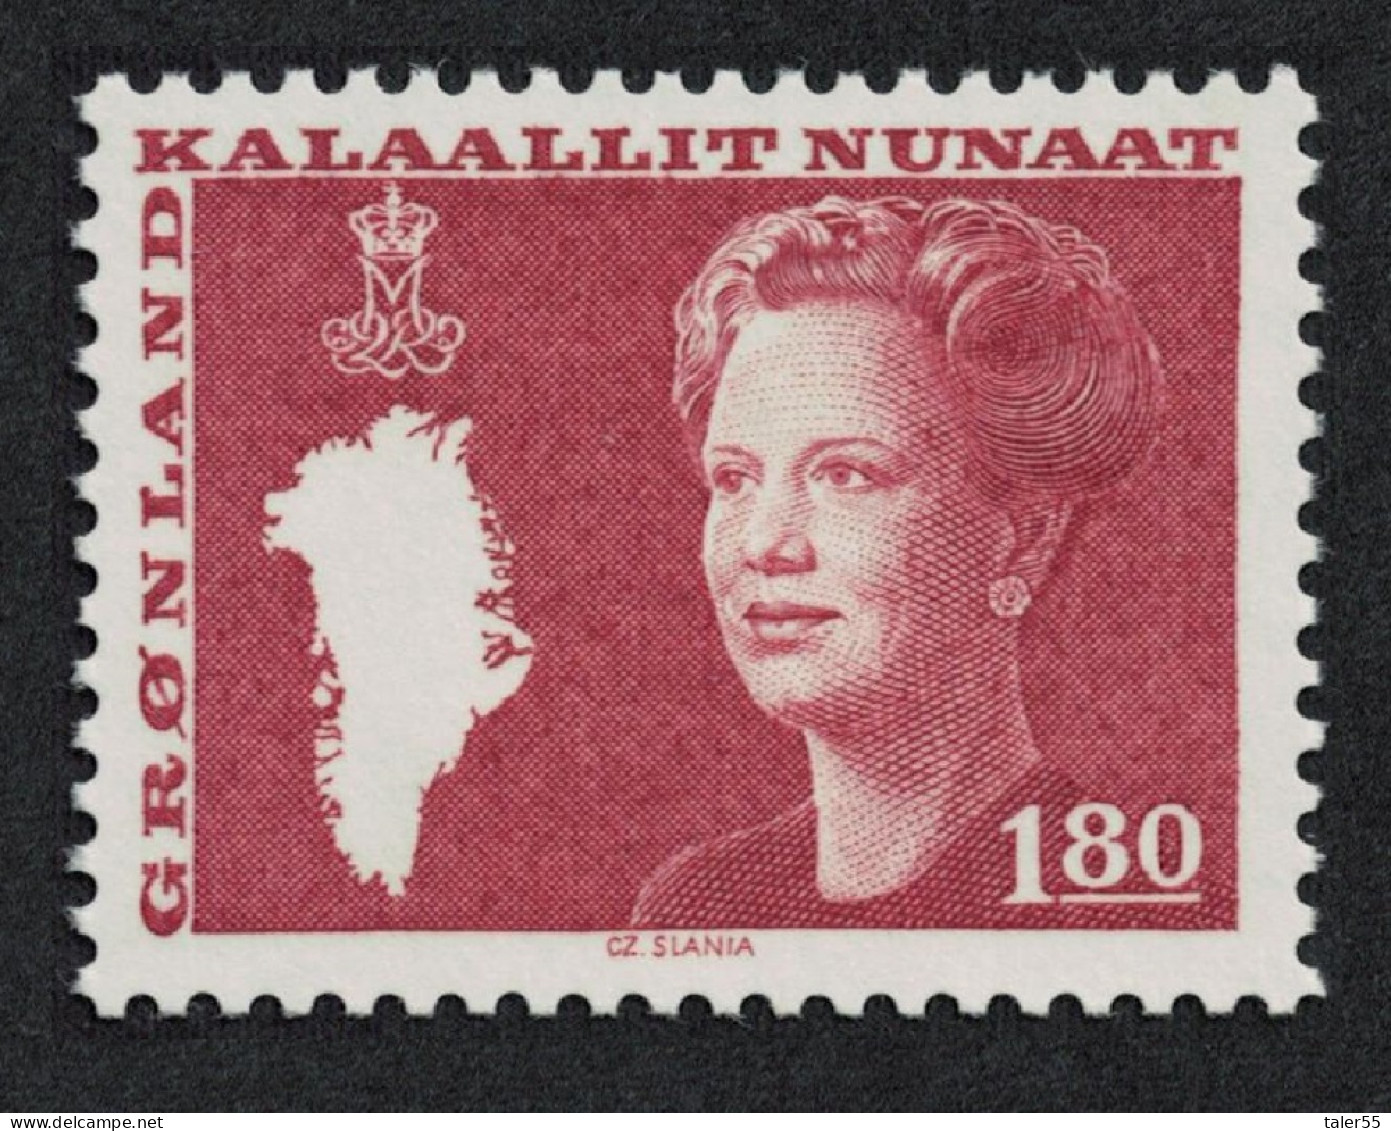 Greenland Queen Margrethe And Map Of Greenland 1k.80 1982 MNH SG#118 MI#135 - Neufs